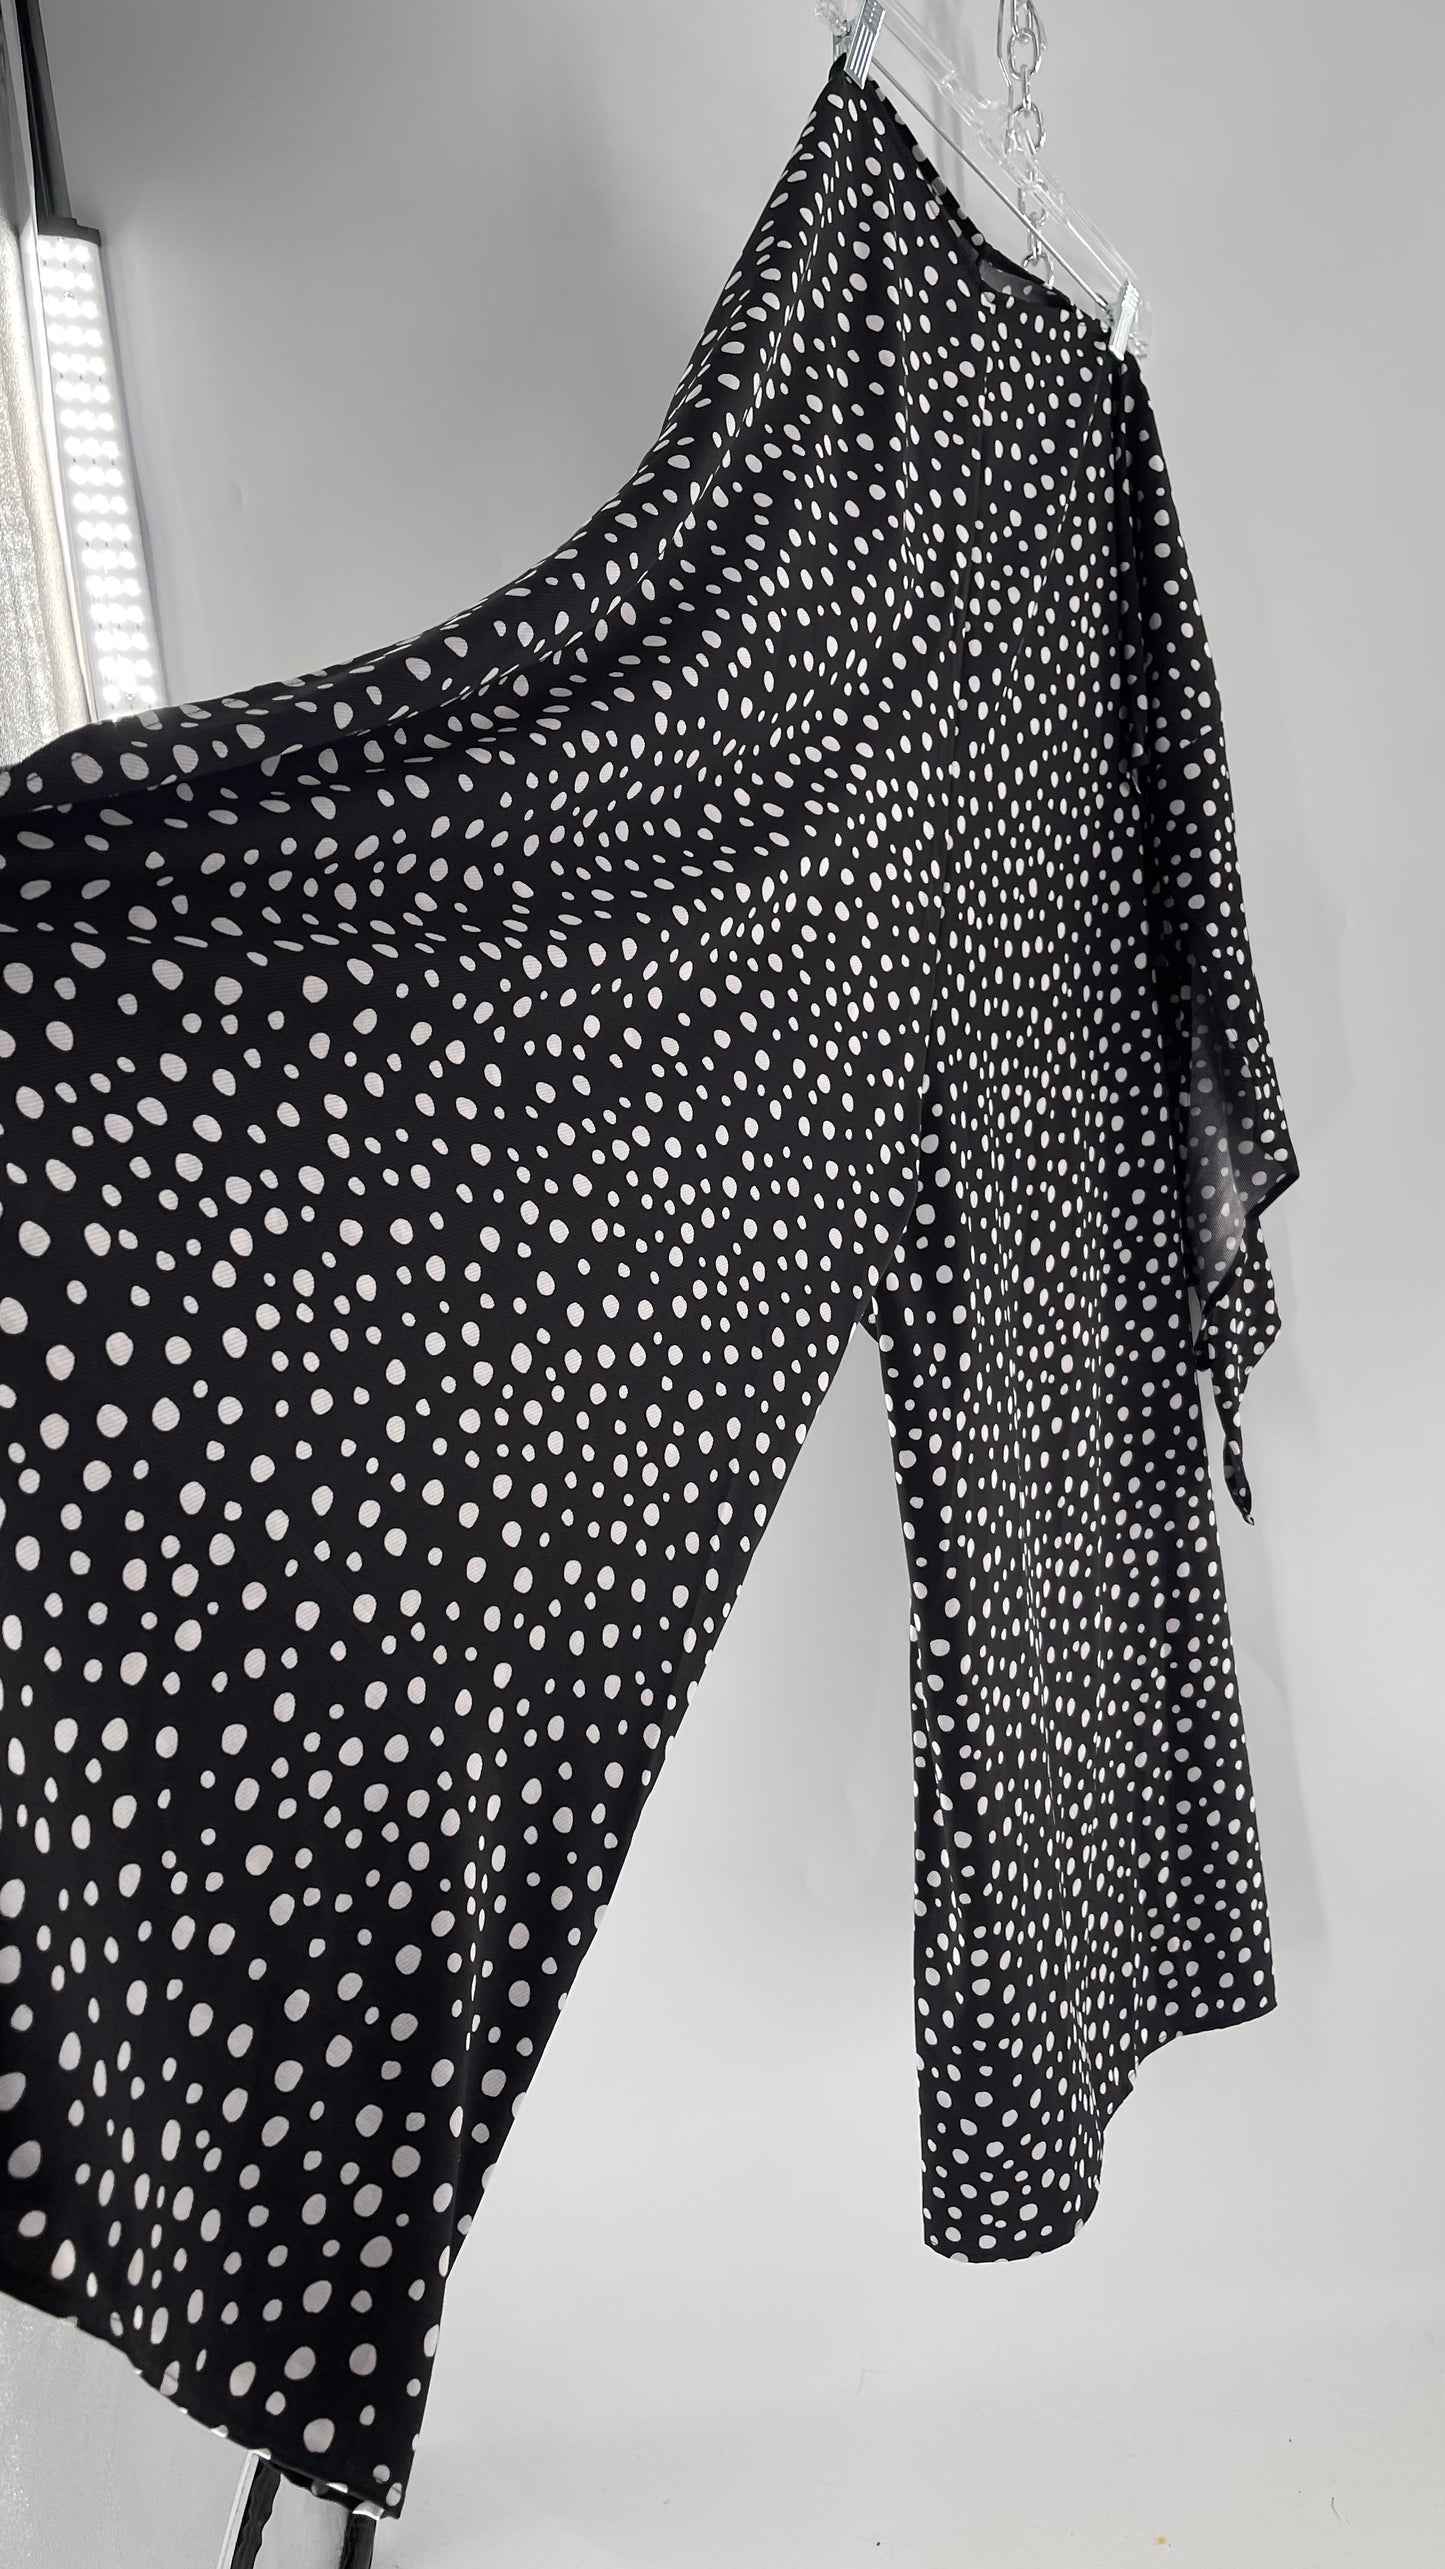 Handmade 9 in 1 Jumpsuit Covered in Black/White Dalmatian Polka Dot Pattern (One Size) •AS SEEN ON TIKTOK•